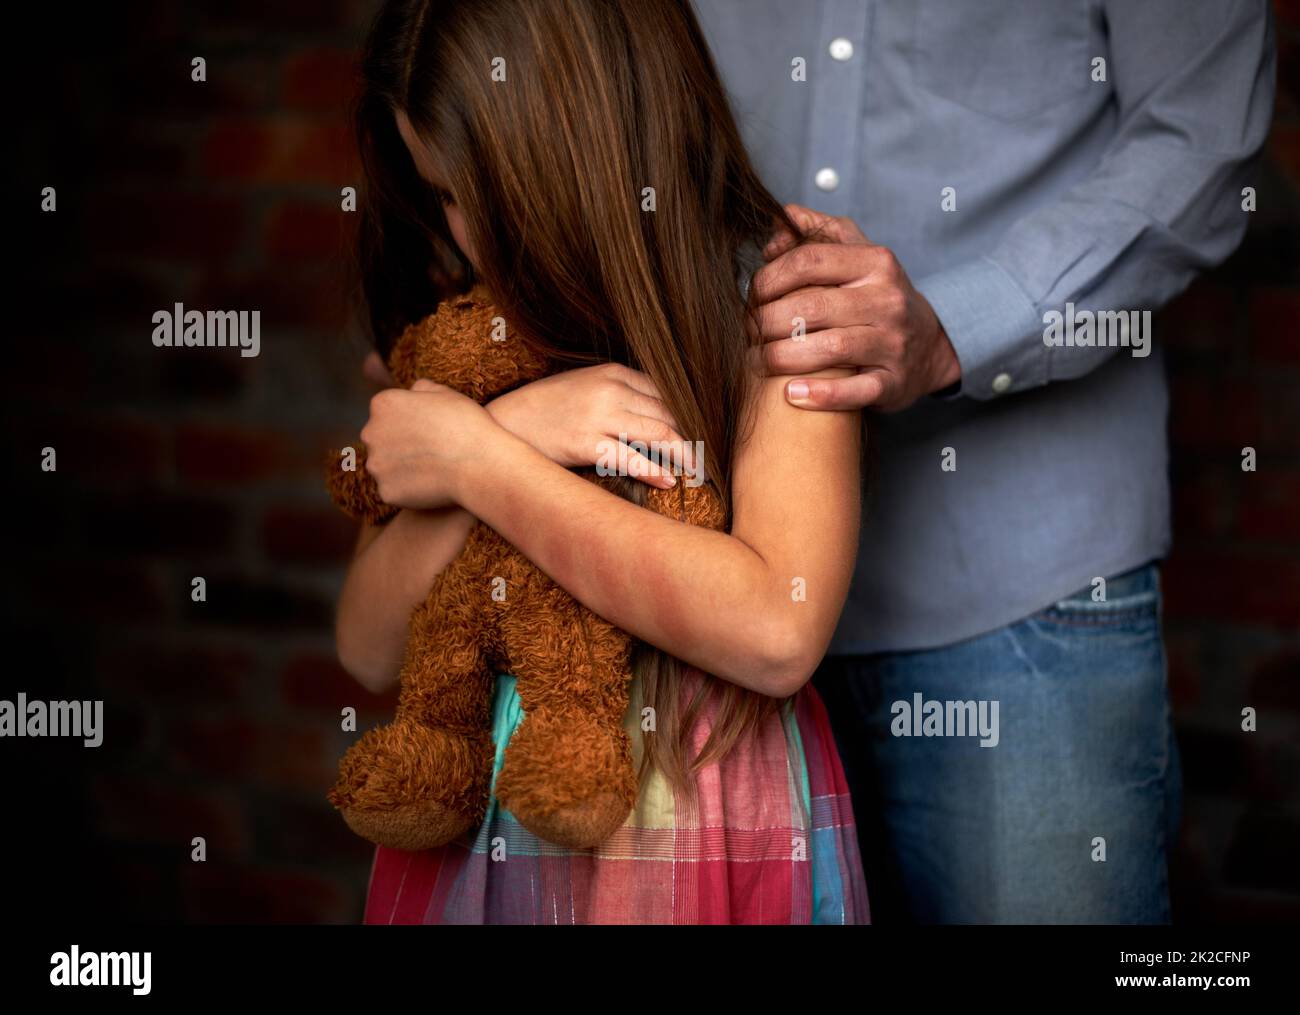 Innocence lost. Abused little girl with her abuser gripping her shoulder. Stock Photo